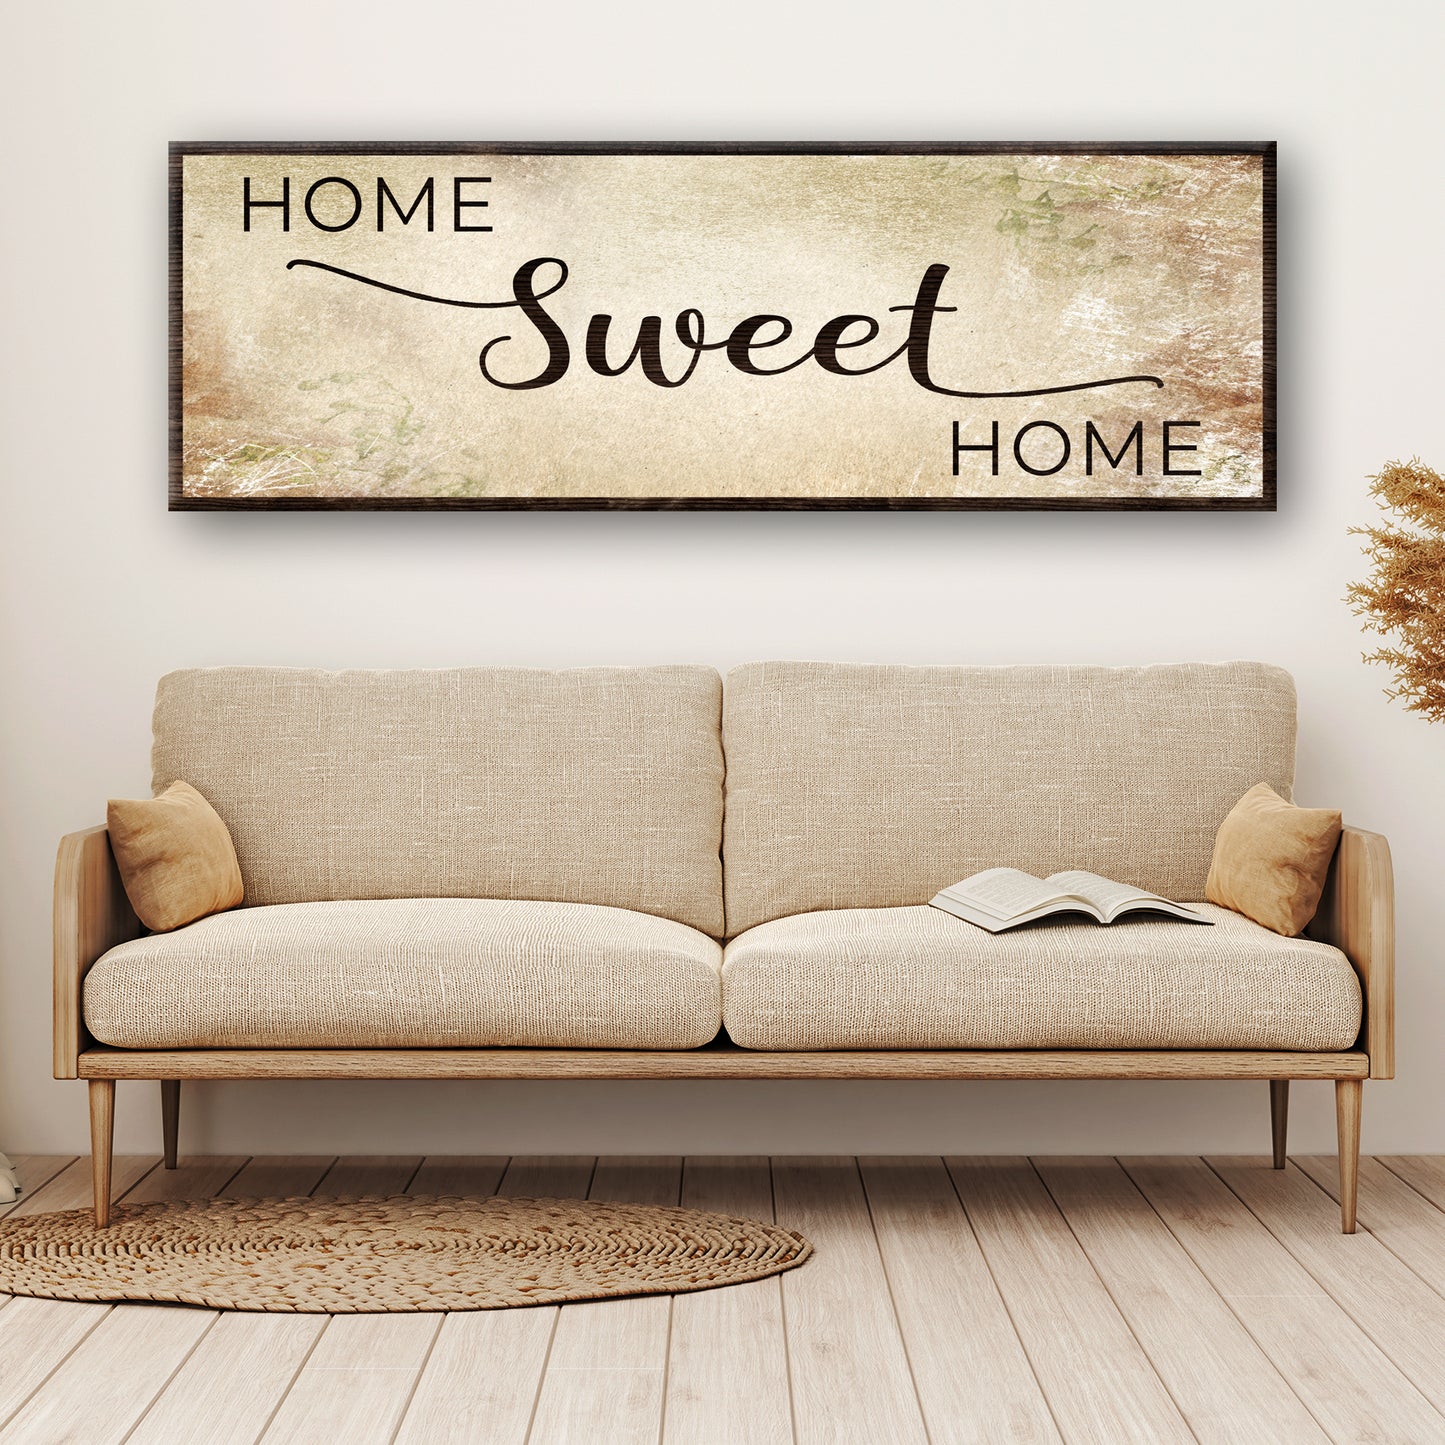 Home Sweet Home Grunge Sign Style 2 - Image by Tailored Canvases